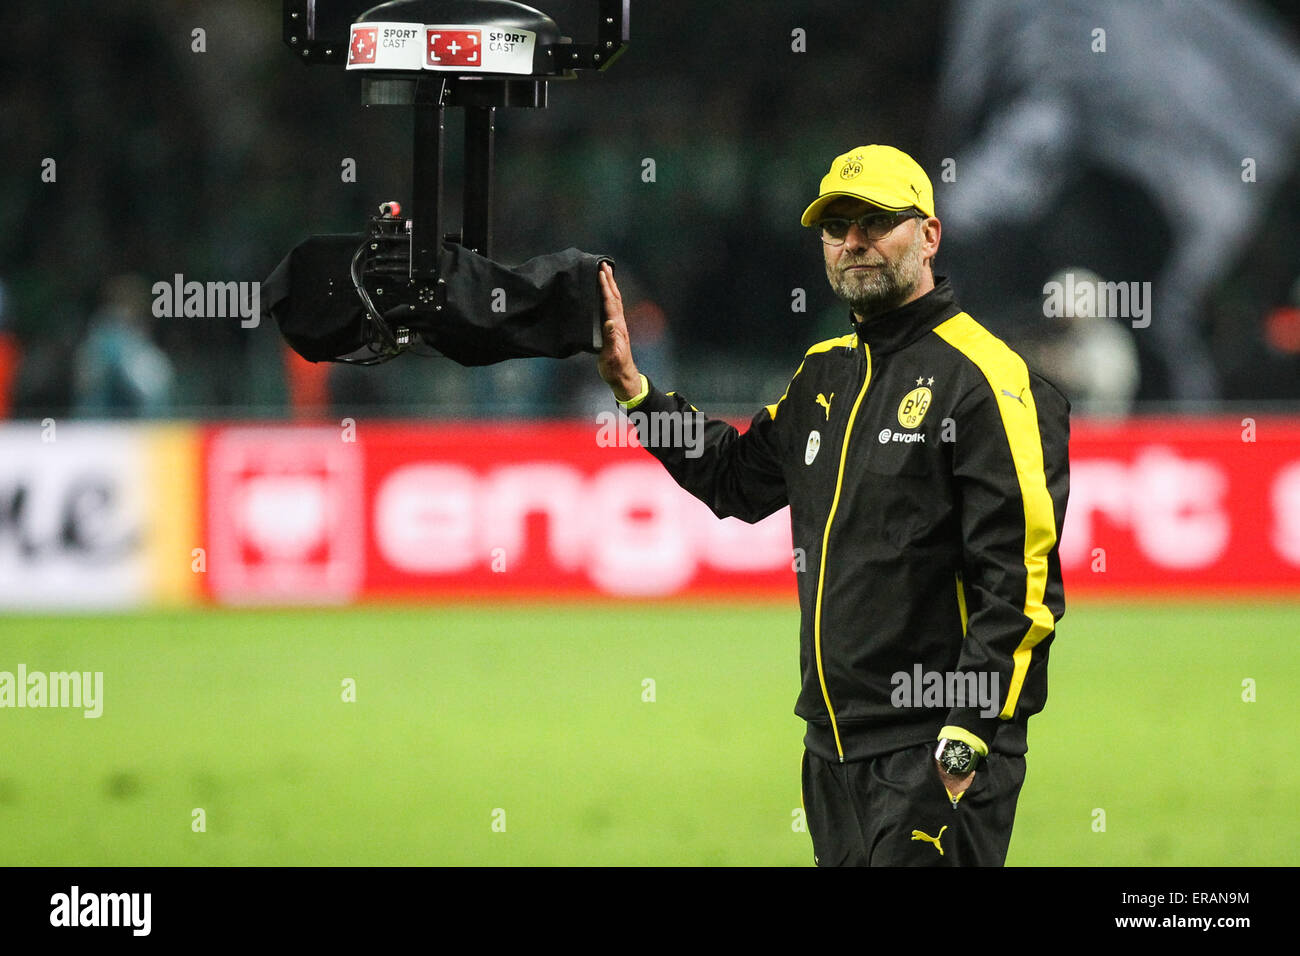 Berlin, Germany. 30th May, 2015. Borussia Dortmund coach Juergen Klopp looks on as he covers the camera after the German Cup (DFB Pokal) final soccer match against VfL Wolfsburg in Berlin, Germany, on May 30, 2015. Borussia Dortmund lost 1-3. © Zhang Fan/Xinhua/Alamy Live News Stock Photo